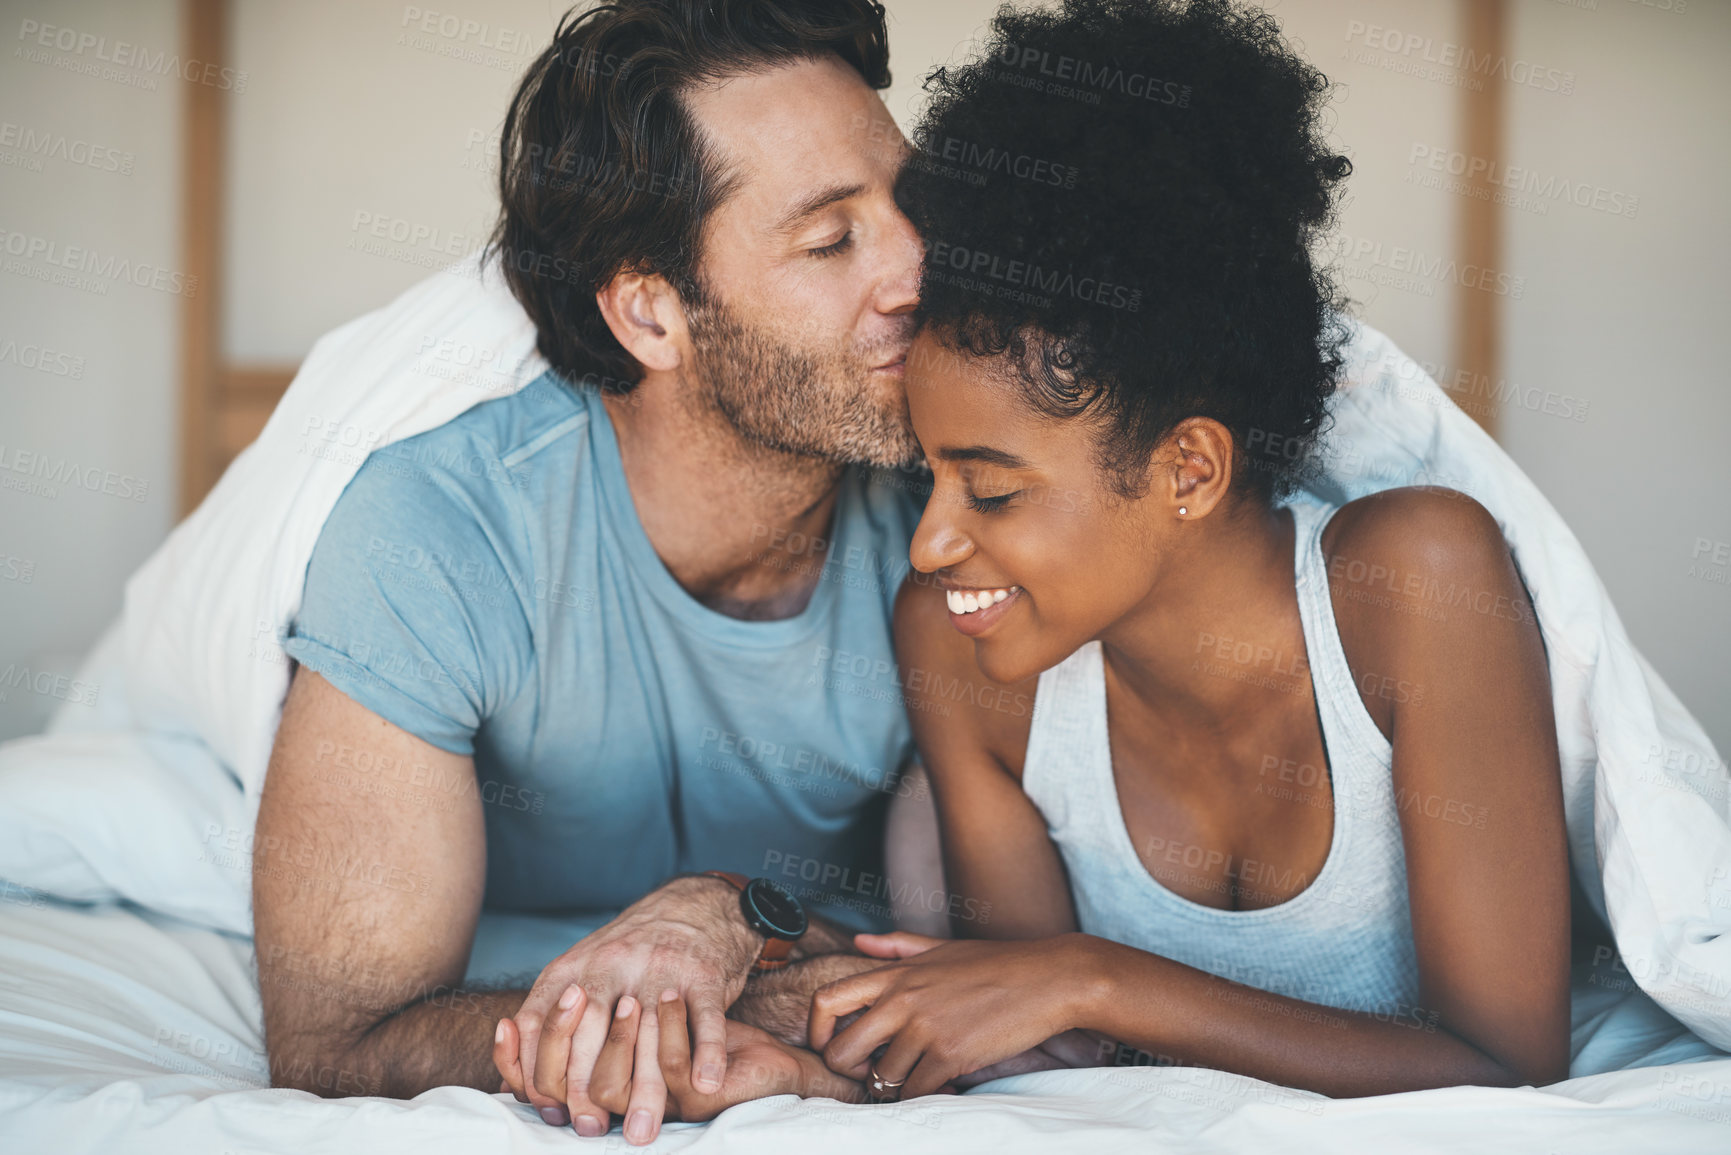 Buy stock photo Happy, carefree and loving couple share a kiss lying in bed together in the morning. Interracial, intimate and caring husband and wife bonding and showing affection while bonding together at home